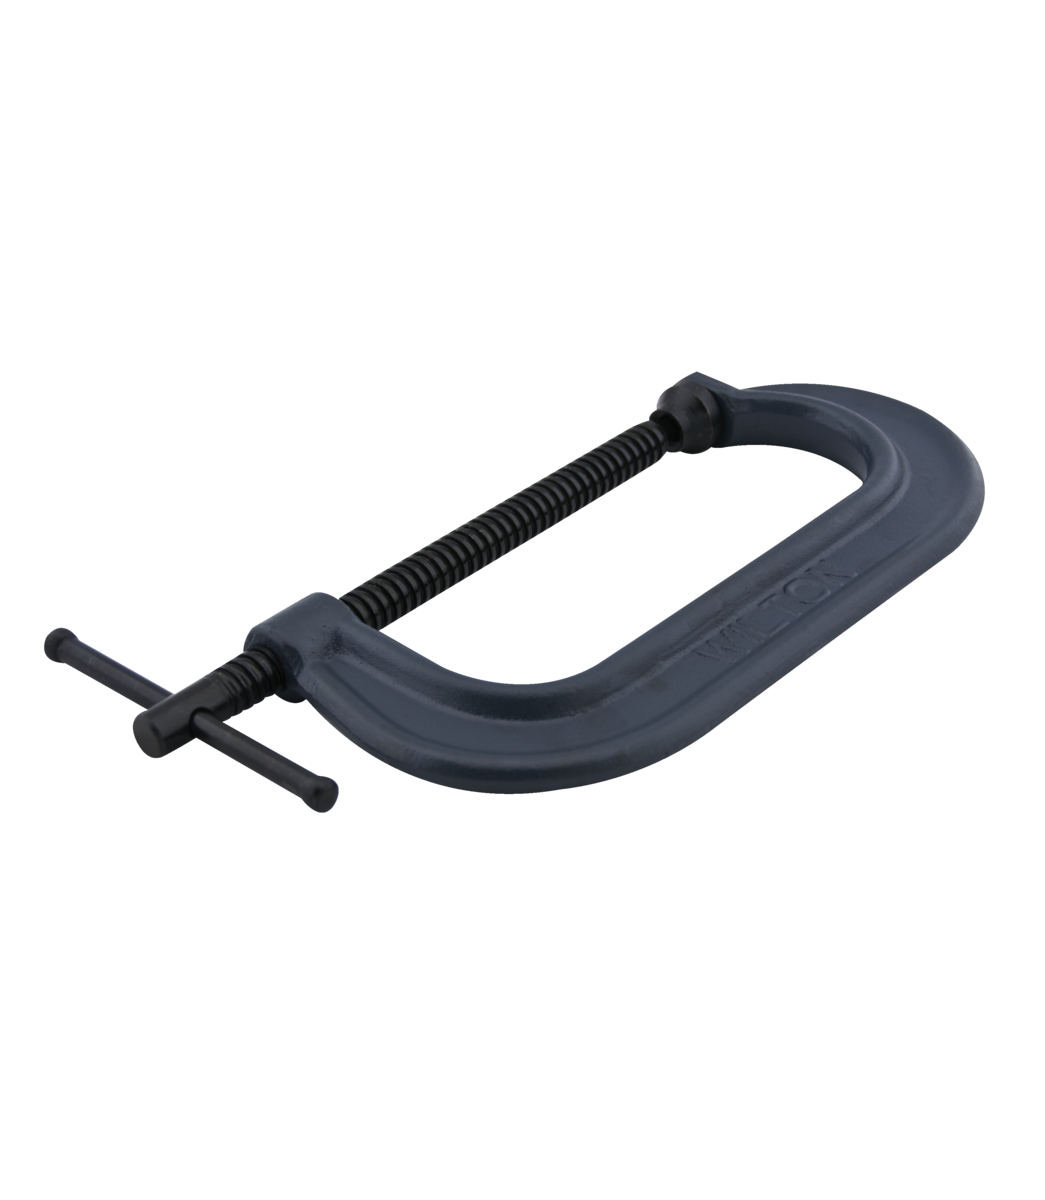 803, 800 Series Standard Depth Drop Forged C-Clamp, 0 -3” Opening, 1-15/16” Throat